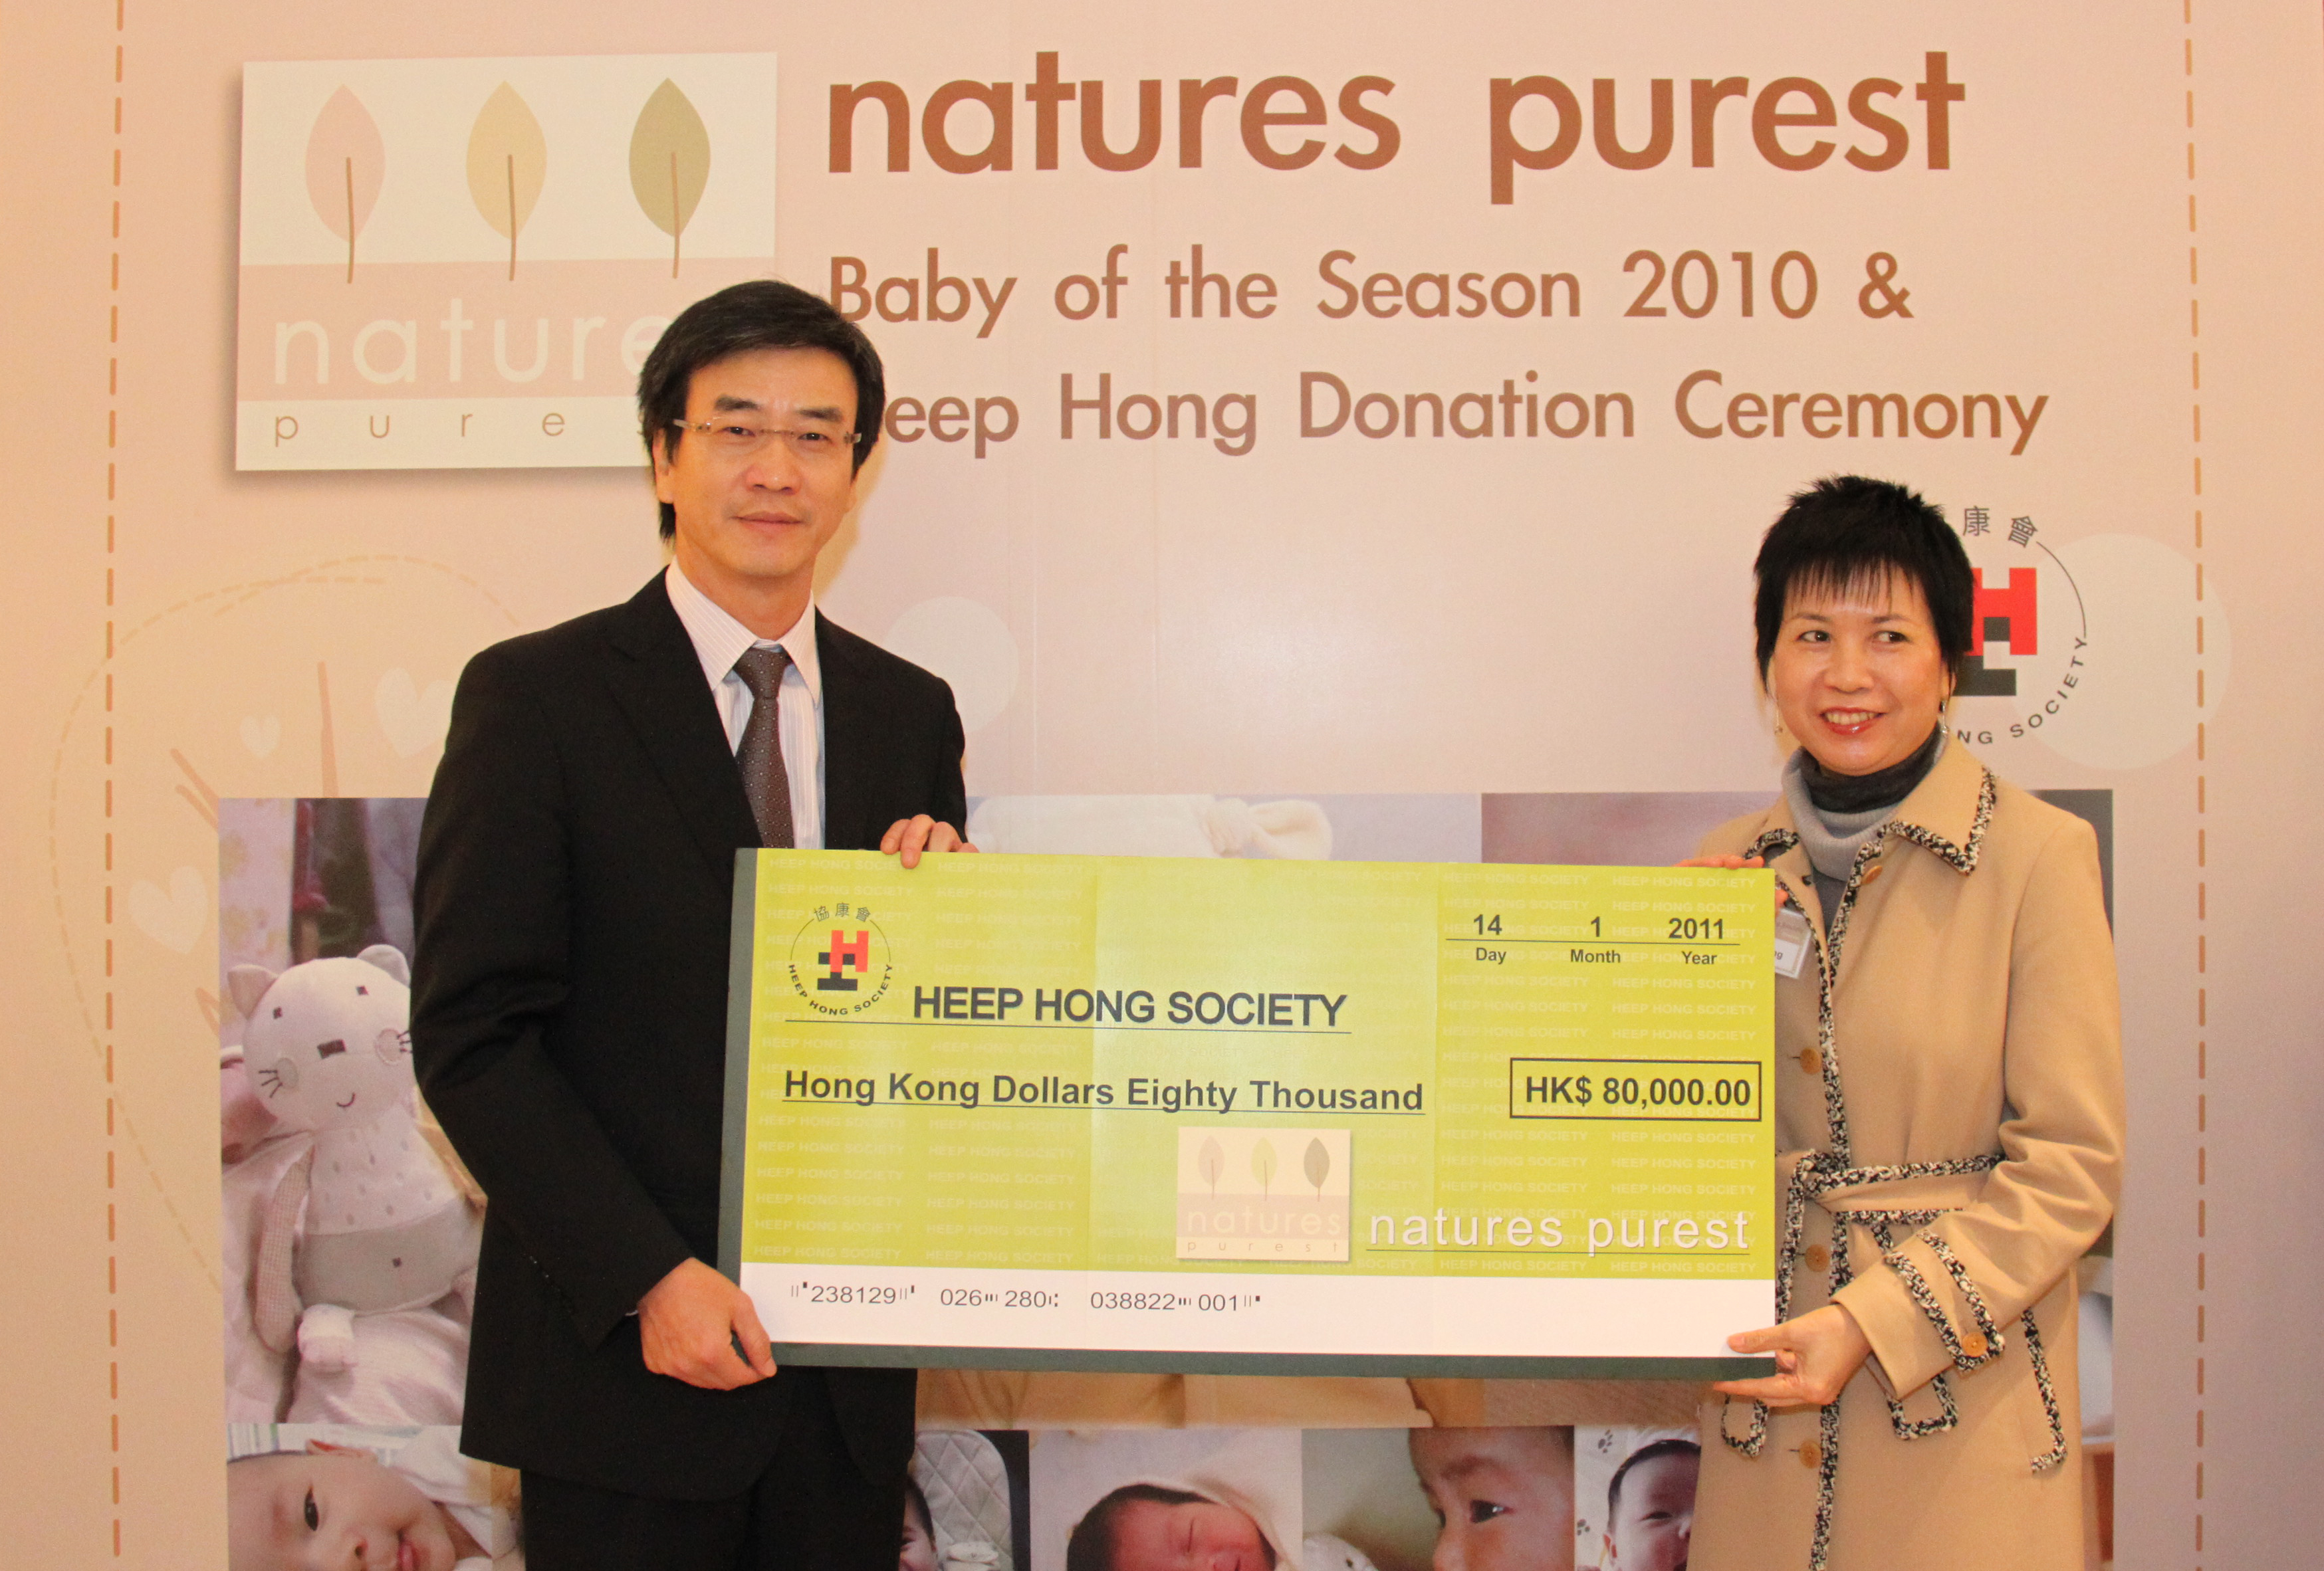 natures purest launched charity sale to support Heep Hong services